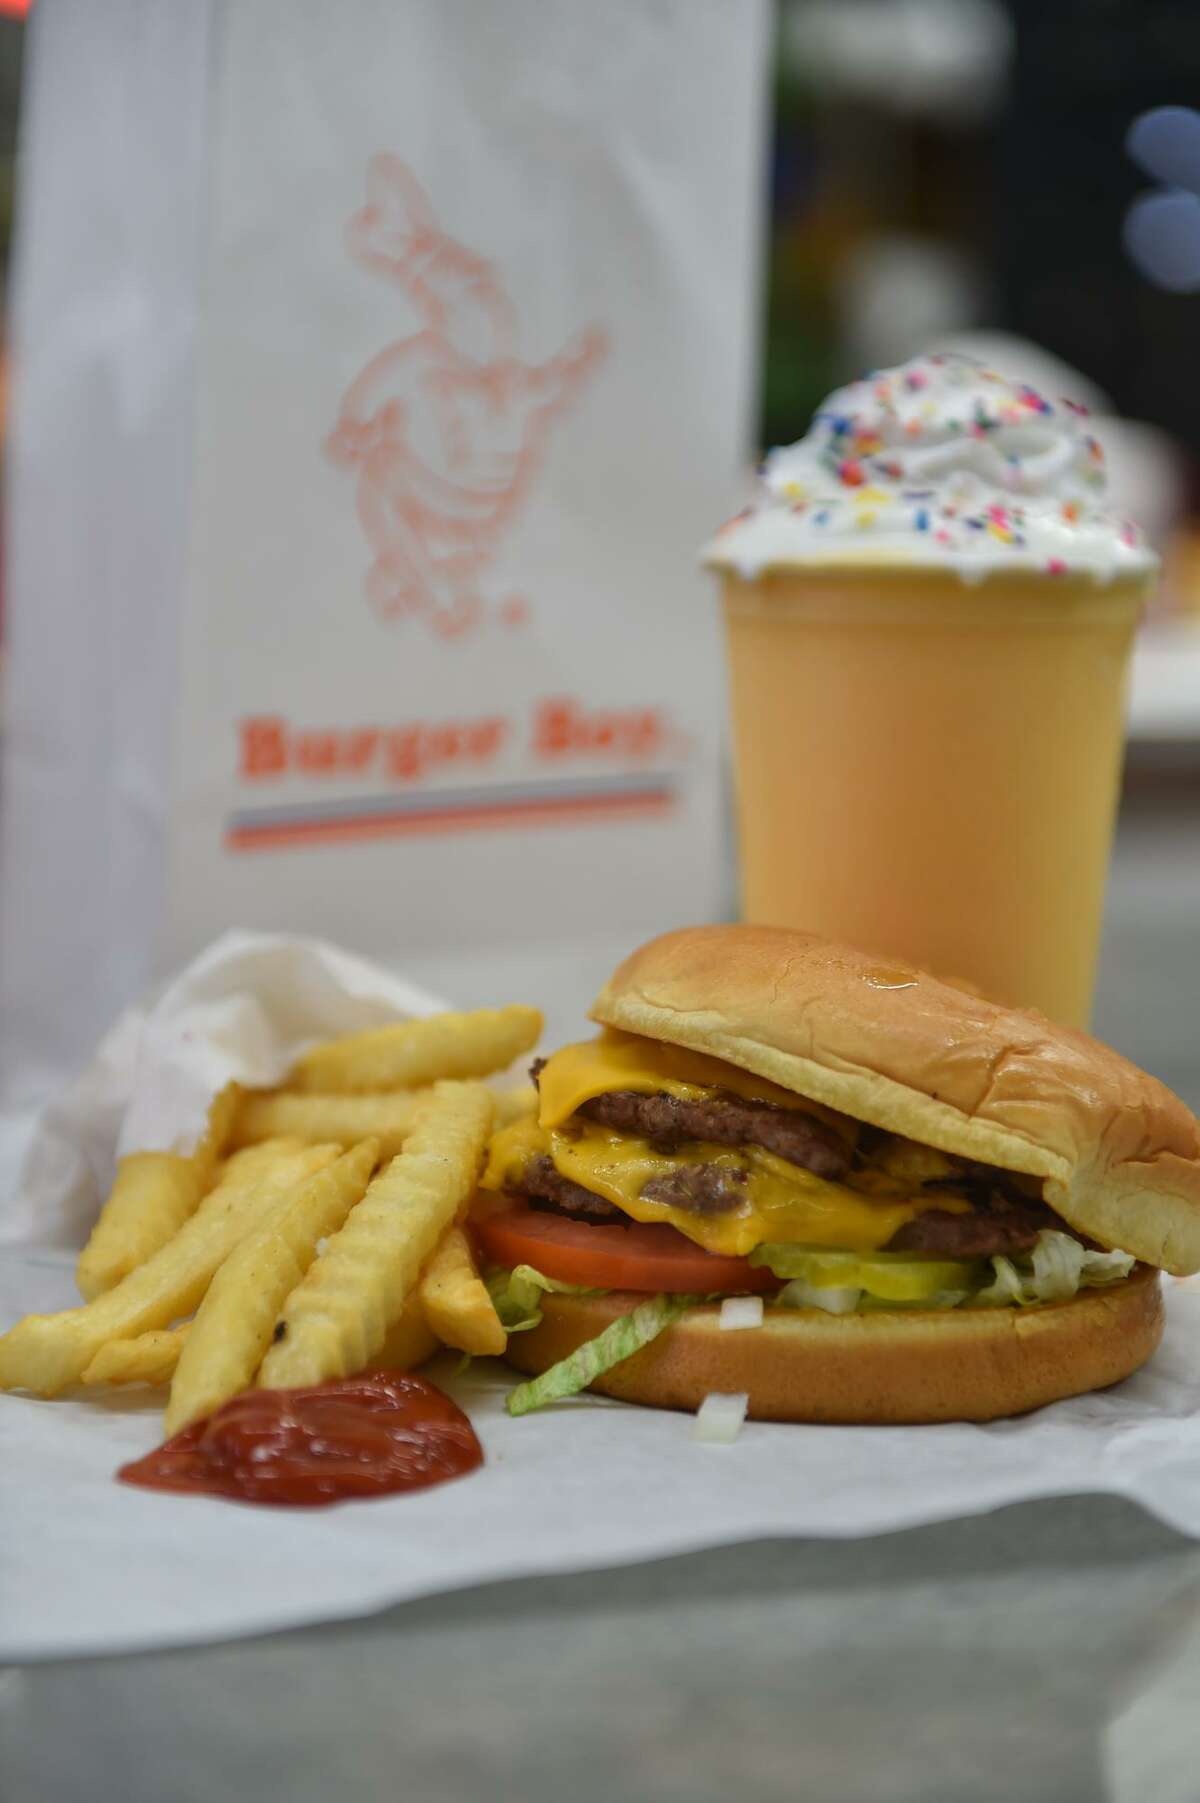 The famed Bates Special includes the Burger Boy, fries and an orange shake from the Burger Boy restaurant at 2323 N. St. Mary's St.